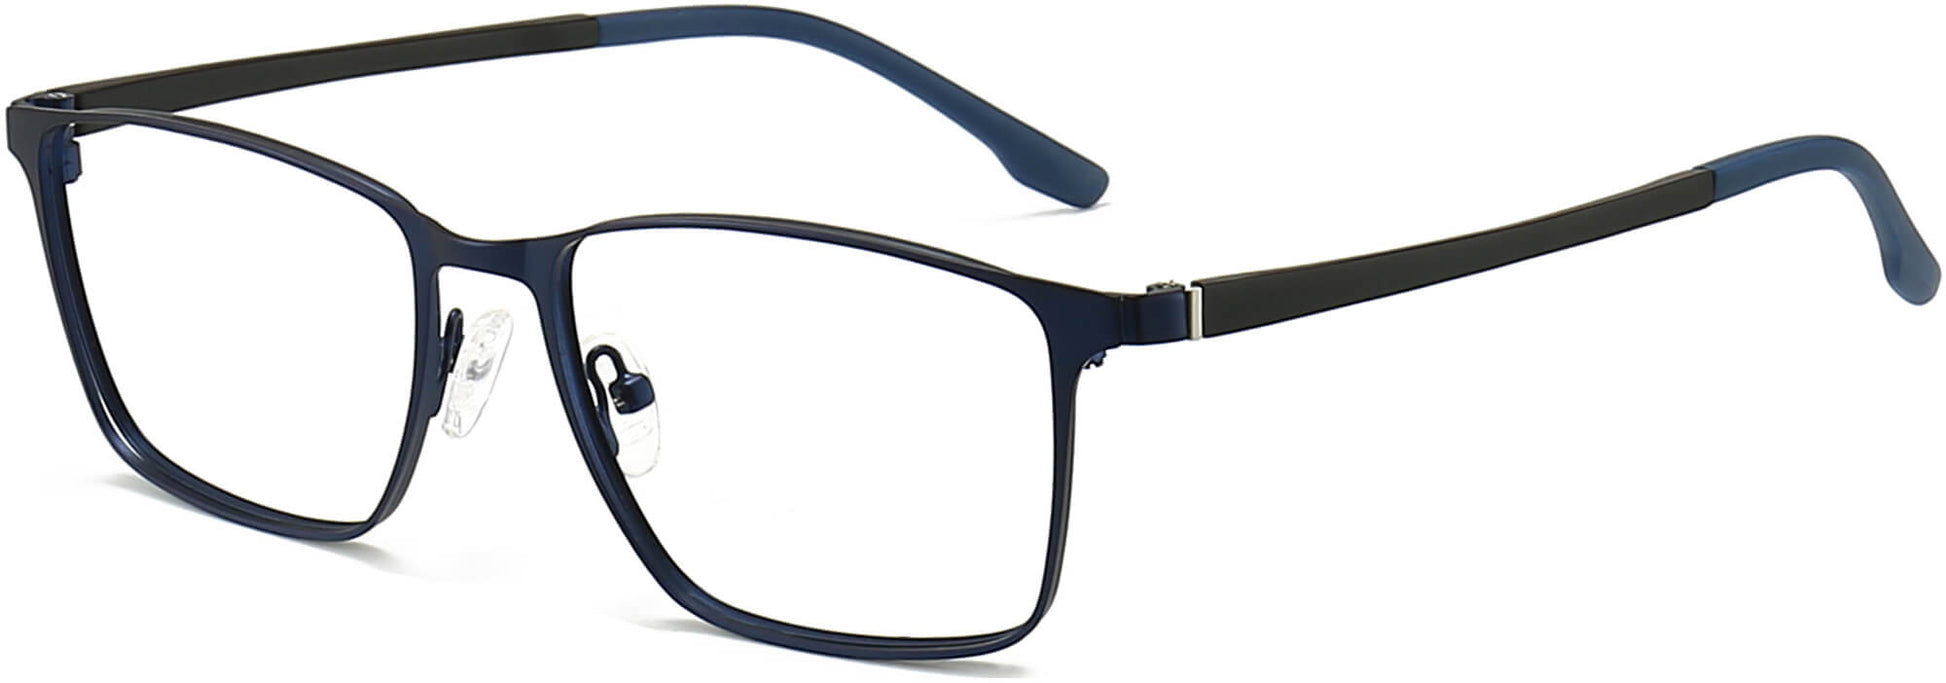 Emir Rectangle Blue Eyeglasses from ANRRI, angle view